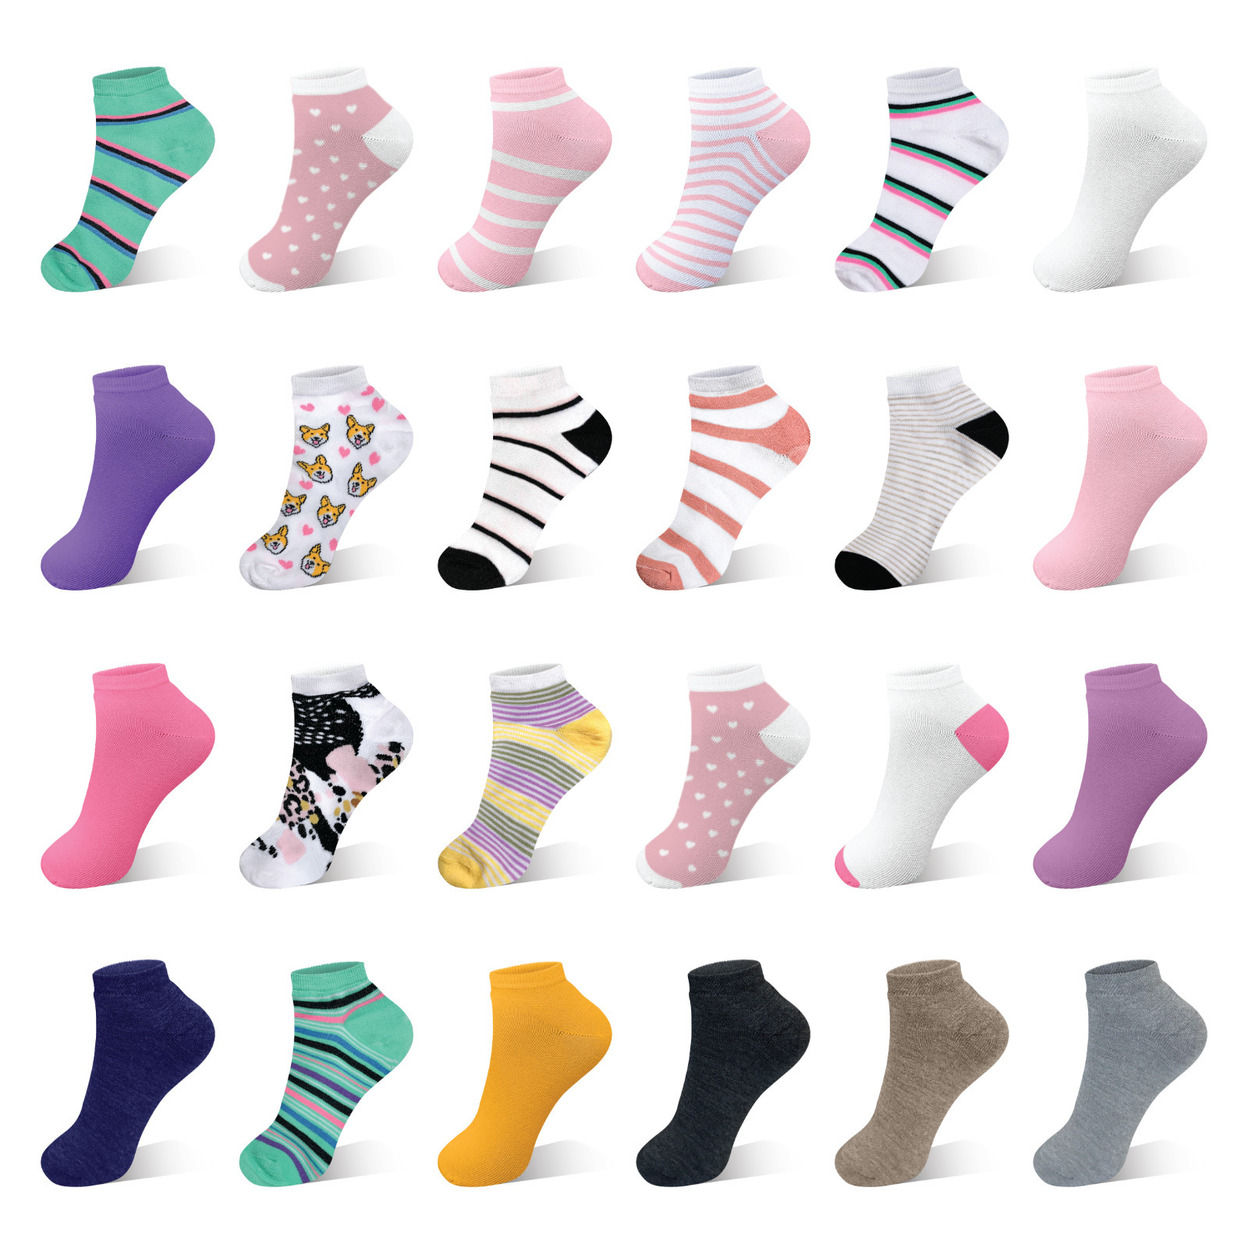 20/40-Pairs: Women’s Breathable Fun-Funky Colorful No Show Low Cut Ankle Socks - 40-pairs